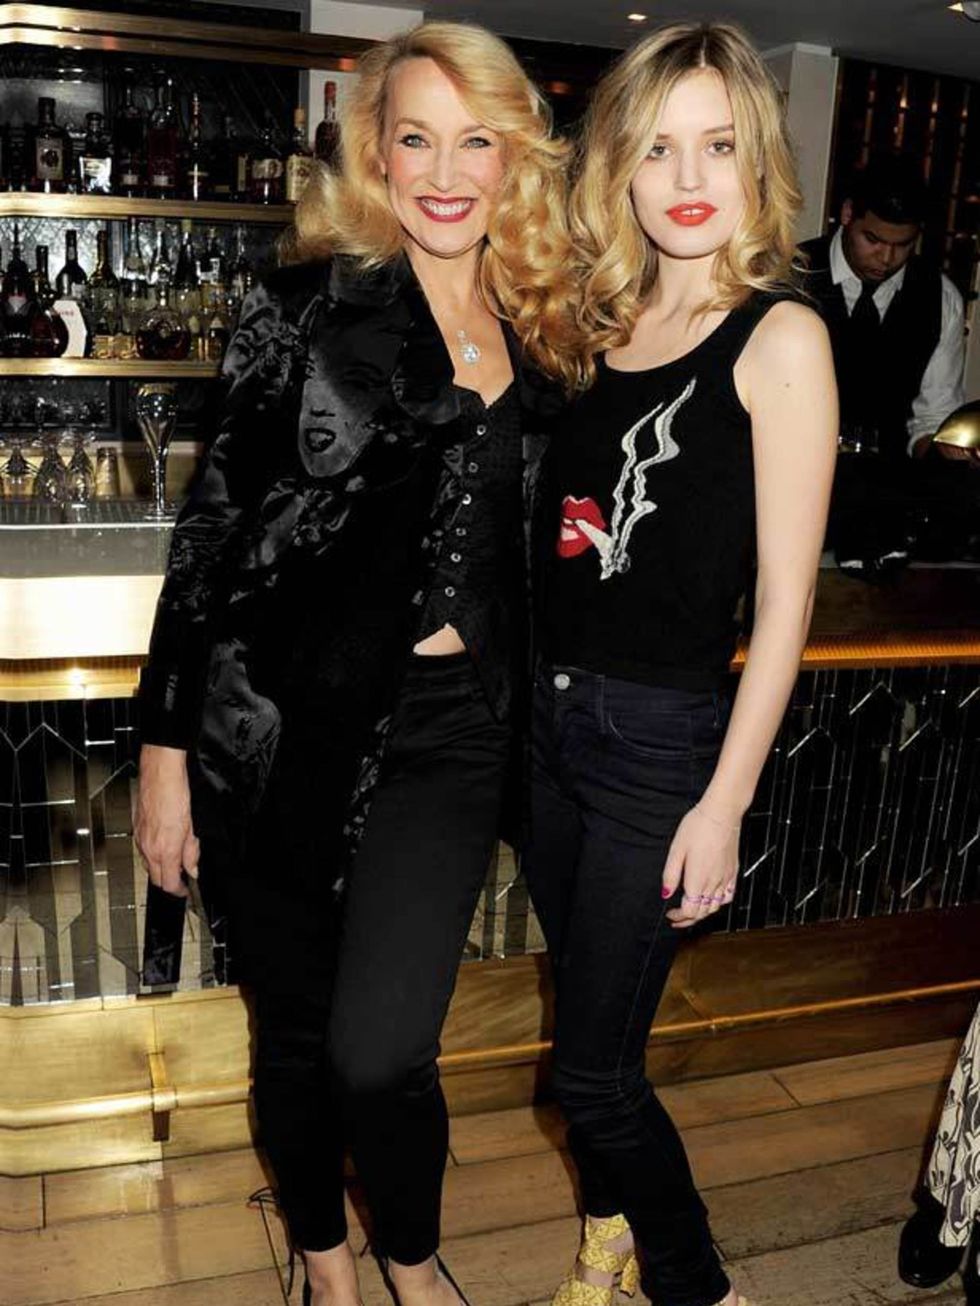 <p><a href="http://www.elleuk.com/content/search?SearchText=jerry+hall&amp;SearchButton=Search">Jerry Hall</a> &amp; daughter <a href="http://www.elleuk.com/starstyle/style-files/(section)/georgia-may-jagger">Georgia May Jagger</a> attend a dinner celebra